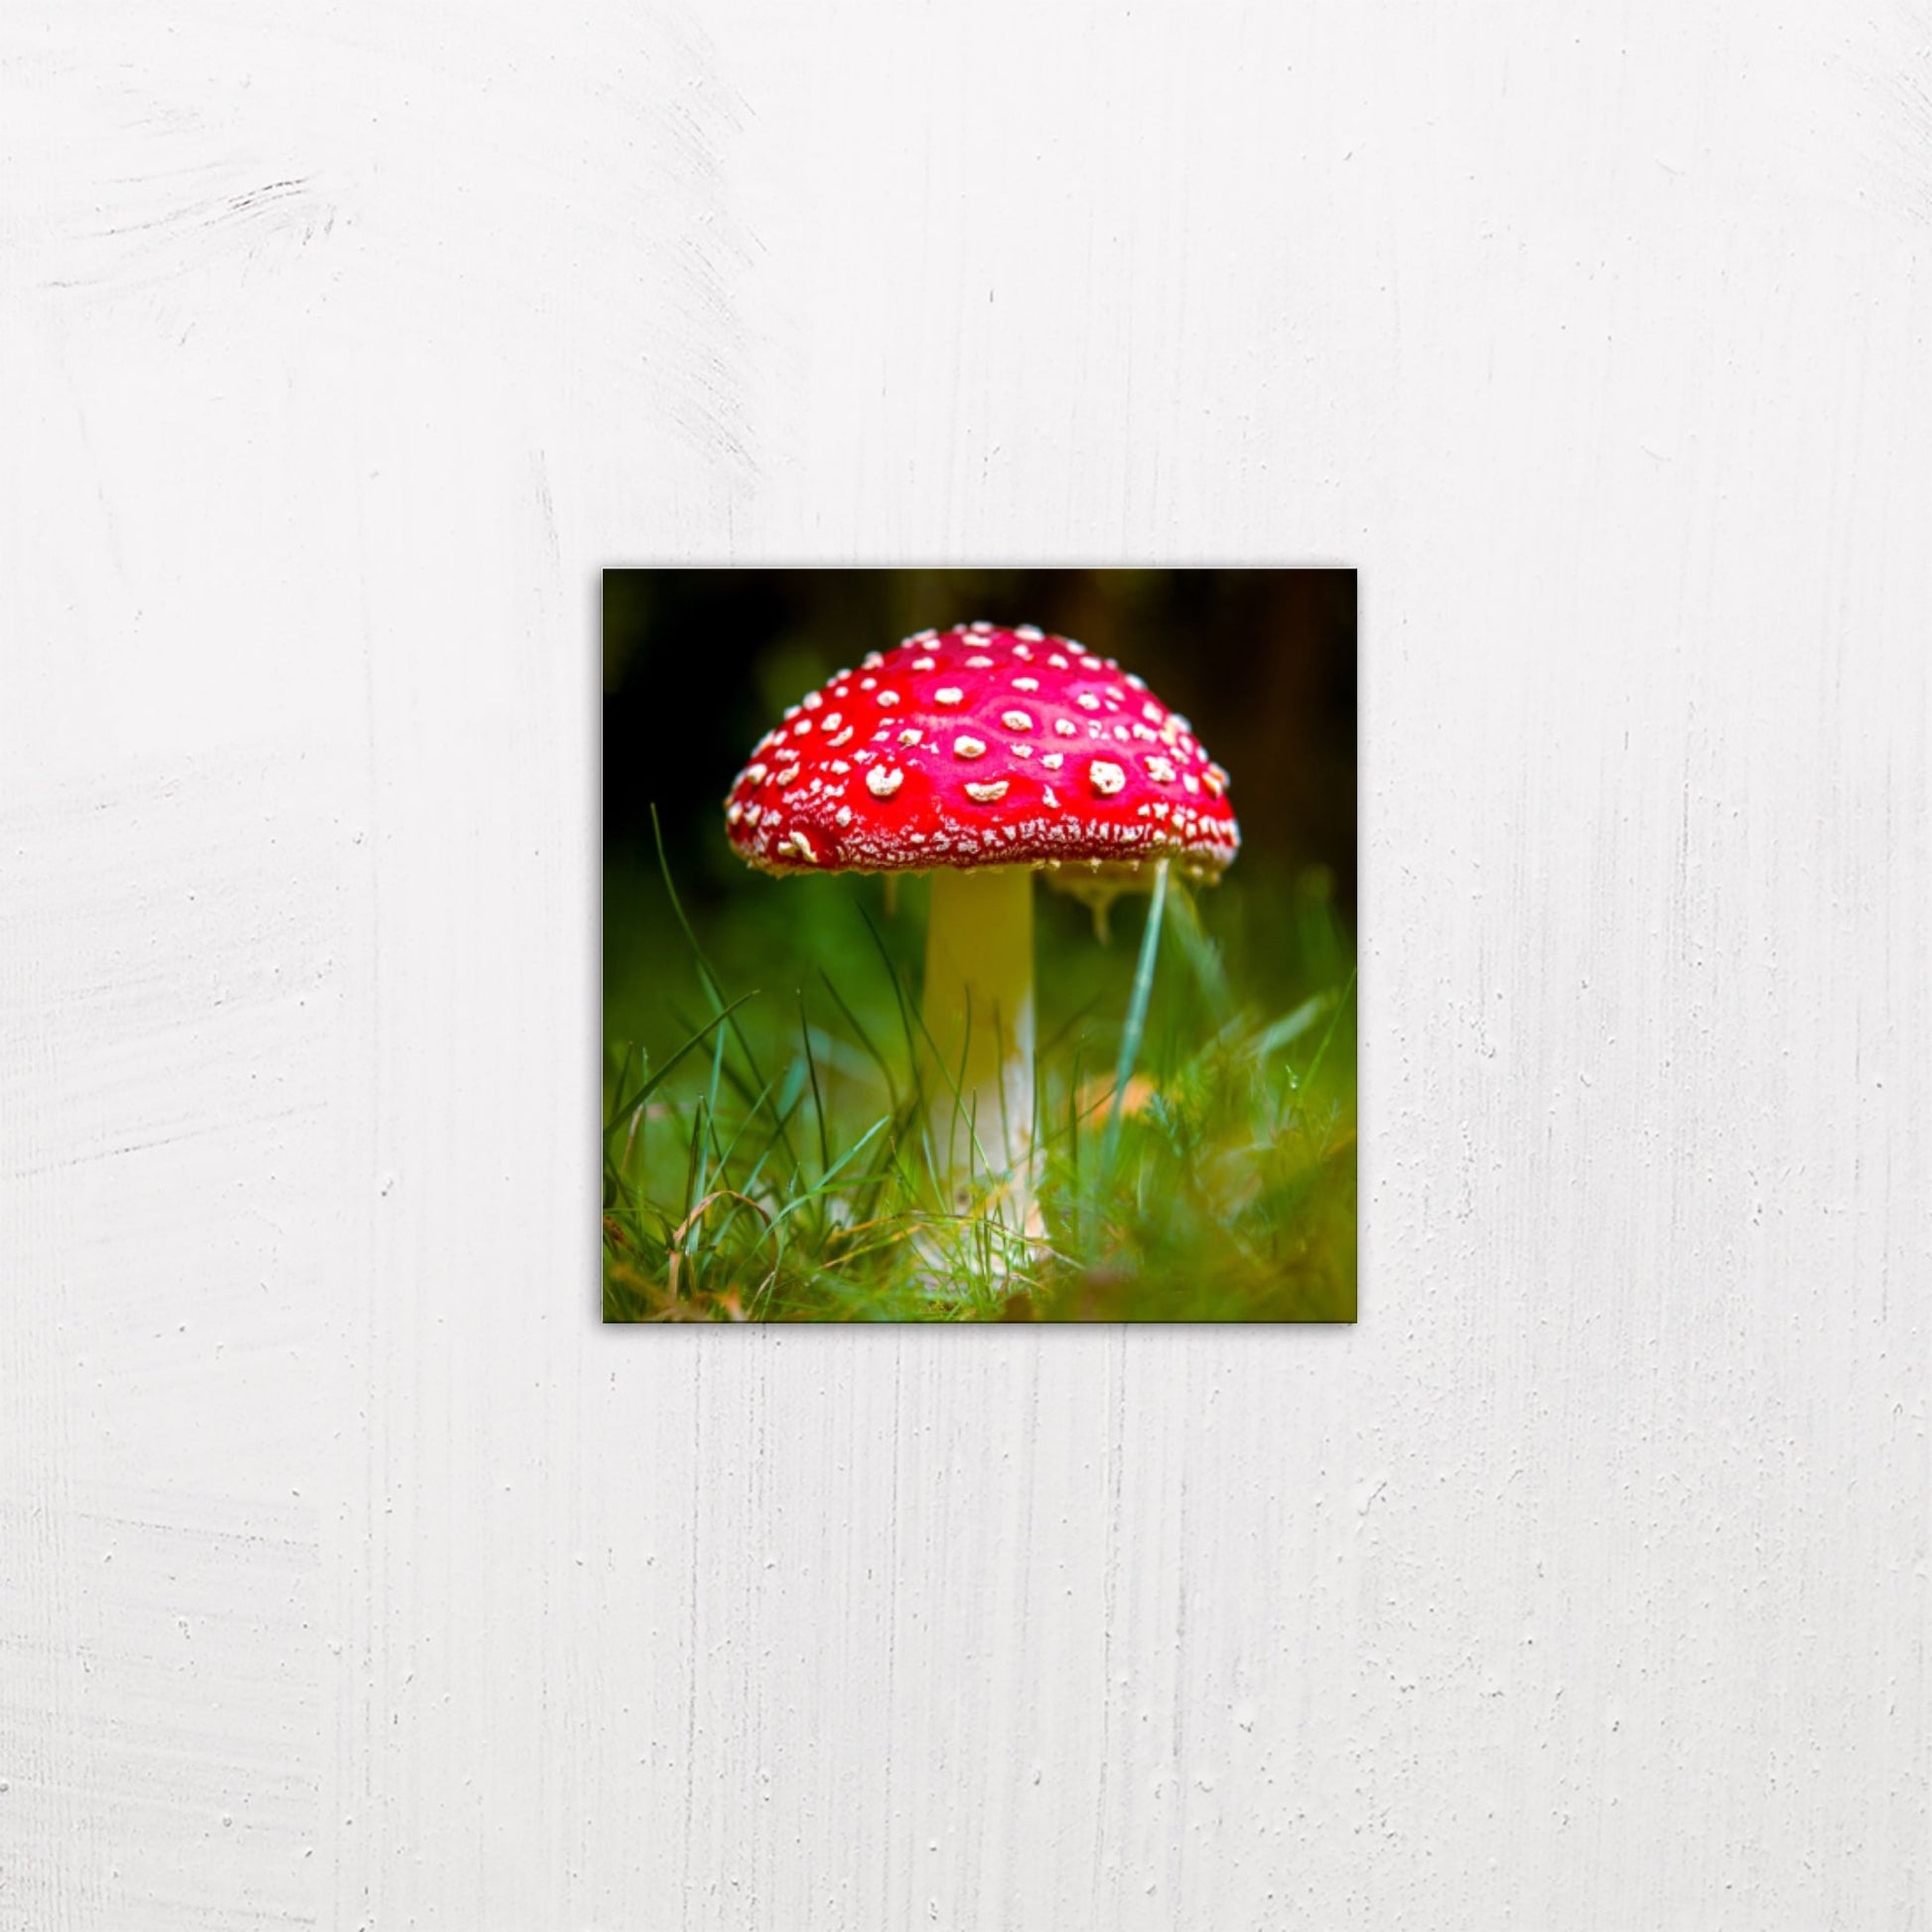 A small size metal art poster display plate with printed design of a Fly Agaric (Amanita muscaria) Fungi